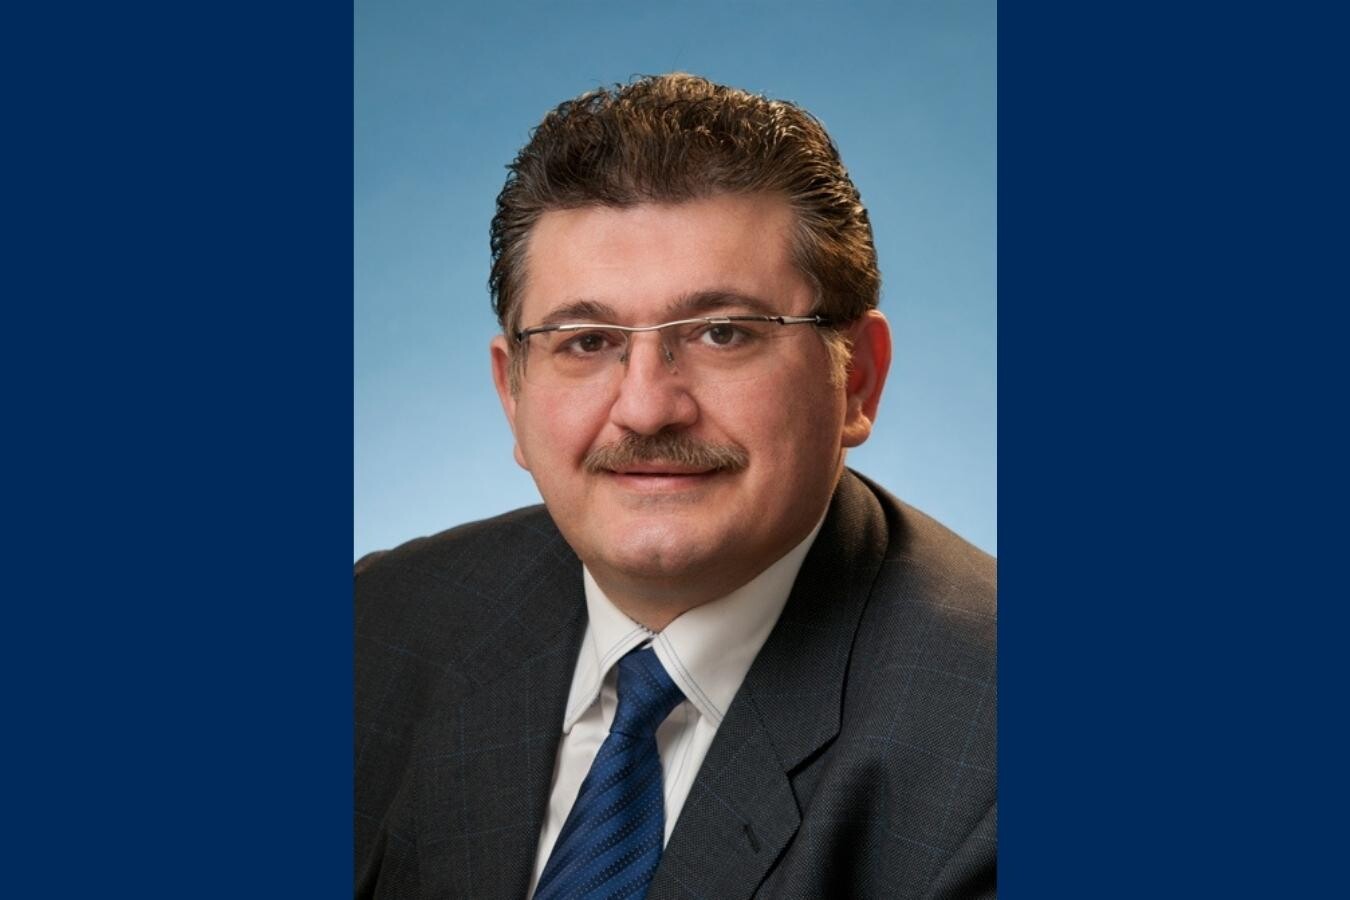 Photo of Dr. Danny Ghazarian on a blue background.